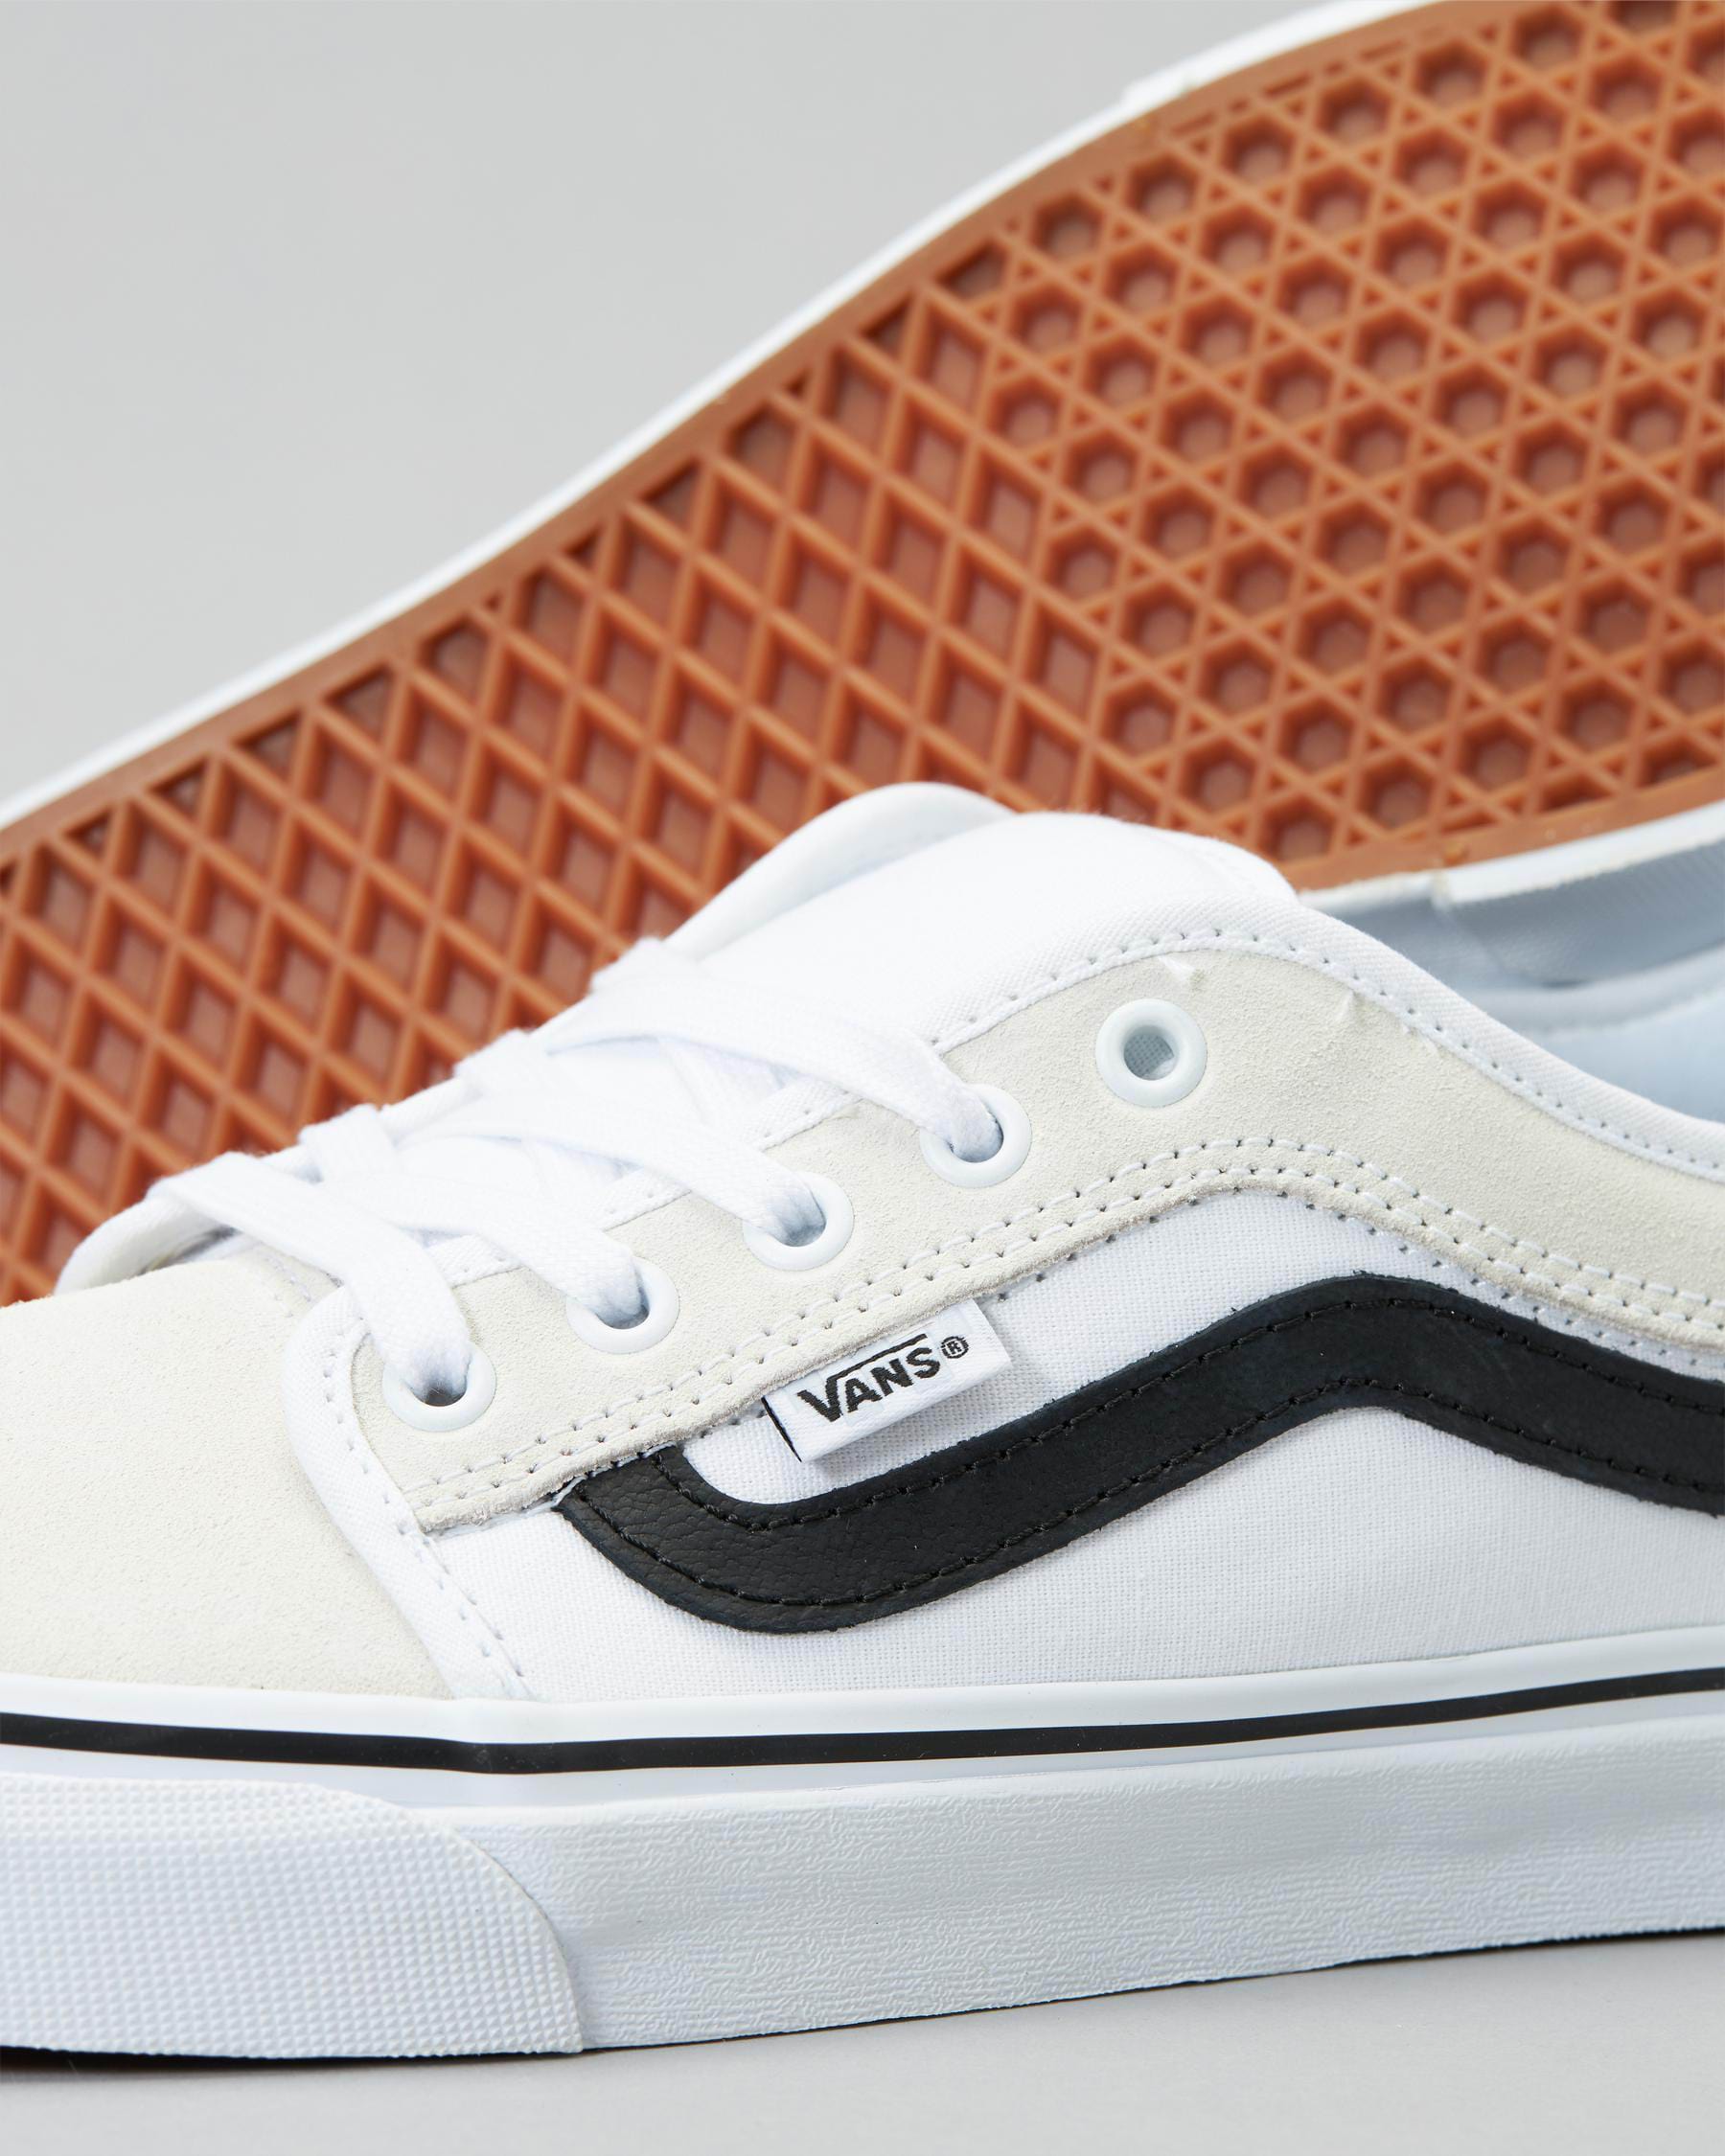 Vans Chukka Low Sidestripe Shoes In White/black/gum - Fast Shipping ...